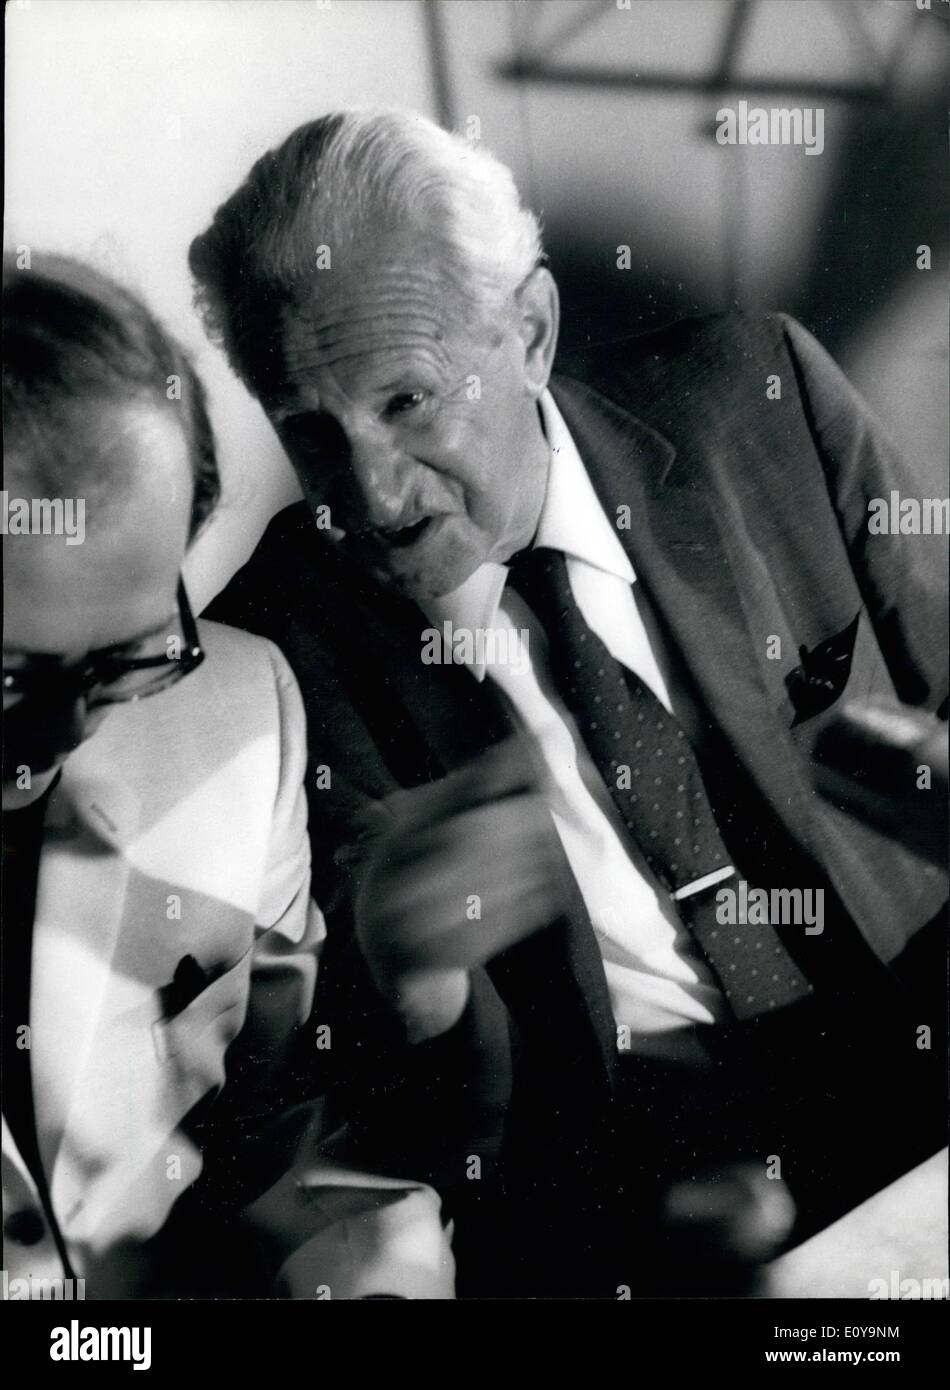 Jun. 06, 1969 - The philosopher Herbert Marcuse, who is in Rome for a conference-tour, held in Rome the last conference before to leave Rome. During his speech how was continually interrupted by the young contesters, between which Daniel Cohn Bendit was the most violent. Photo shows Herbert Marcuse during his speech. Stock Photo